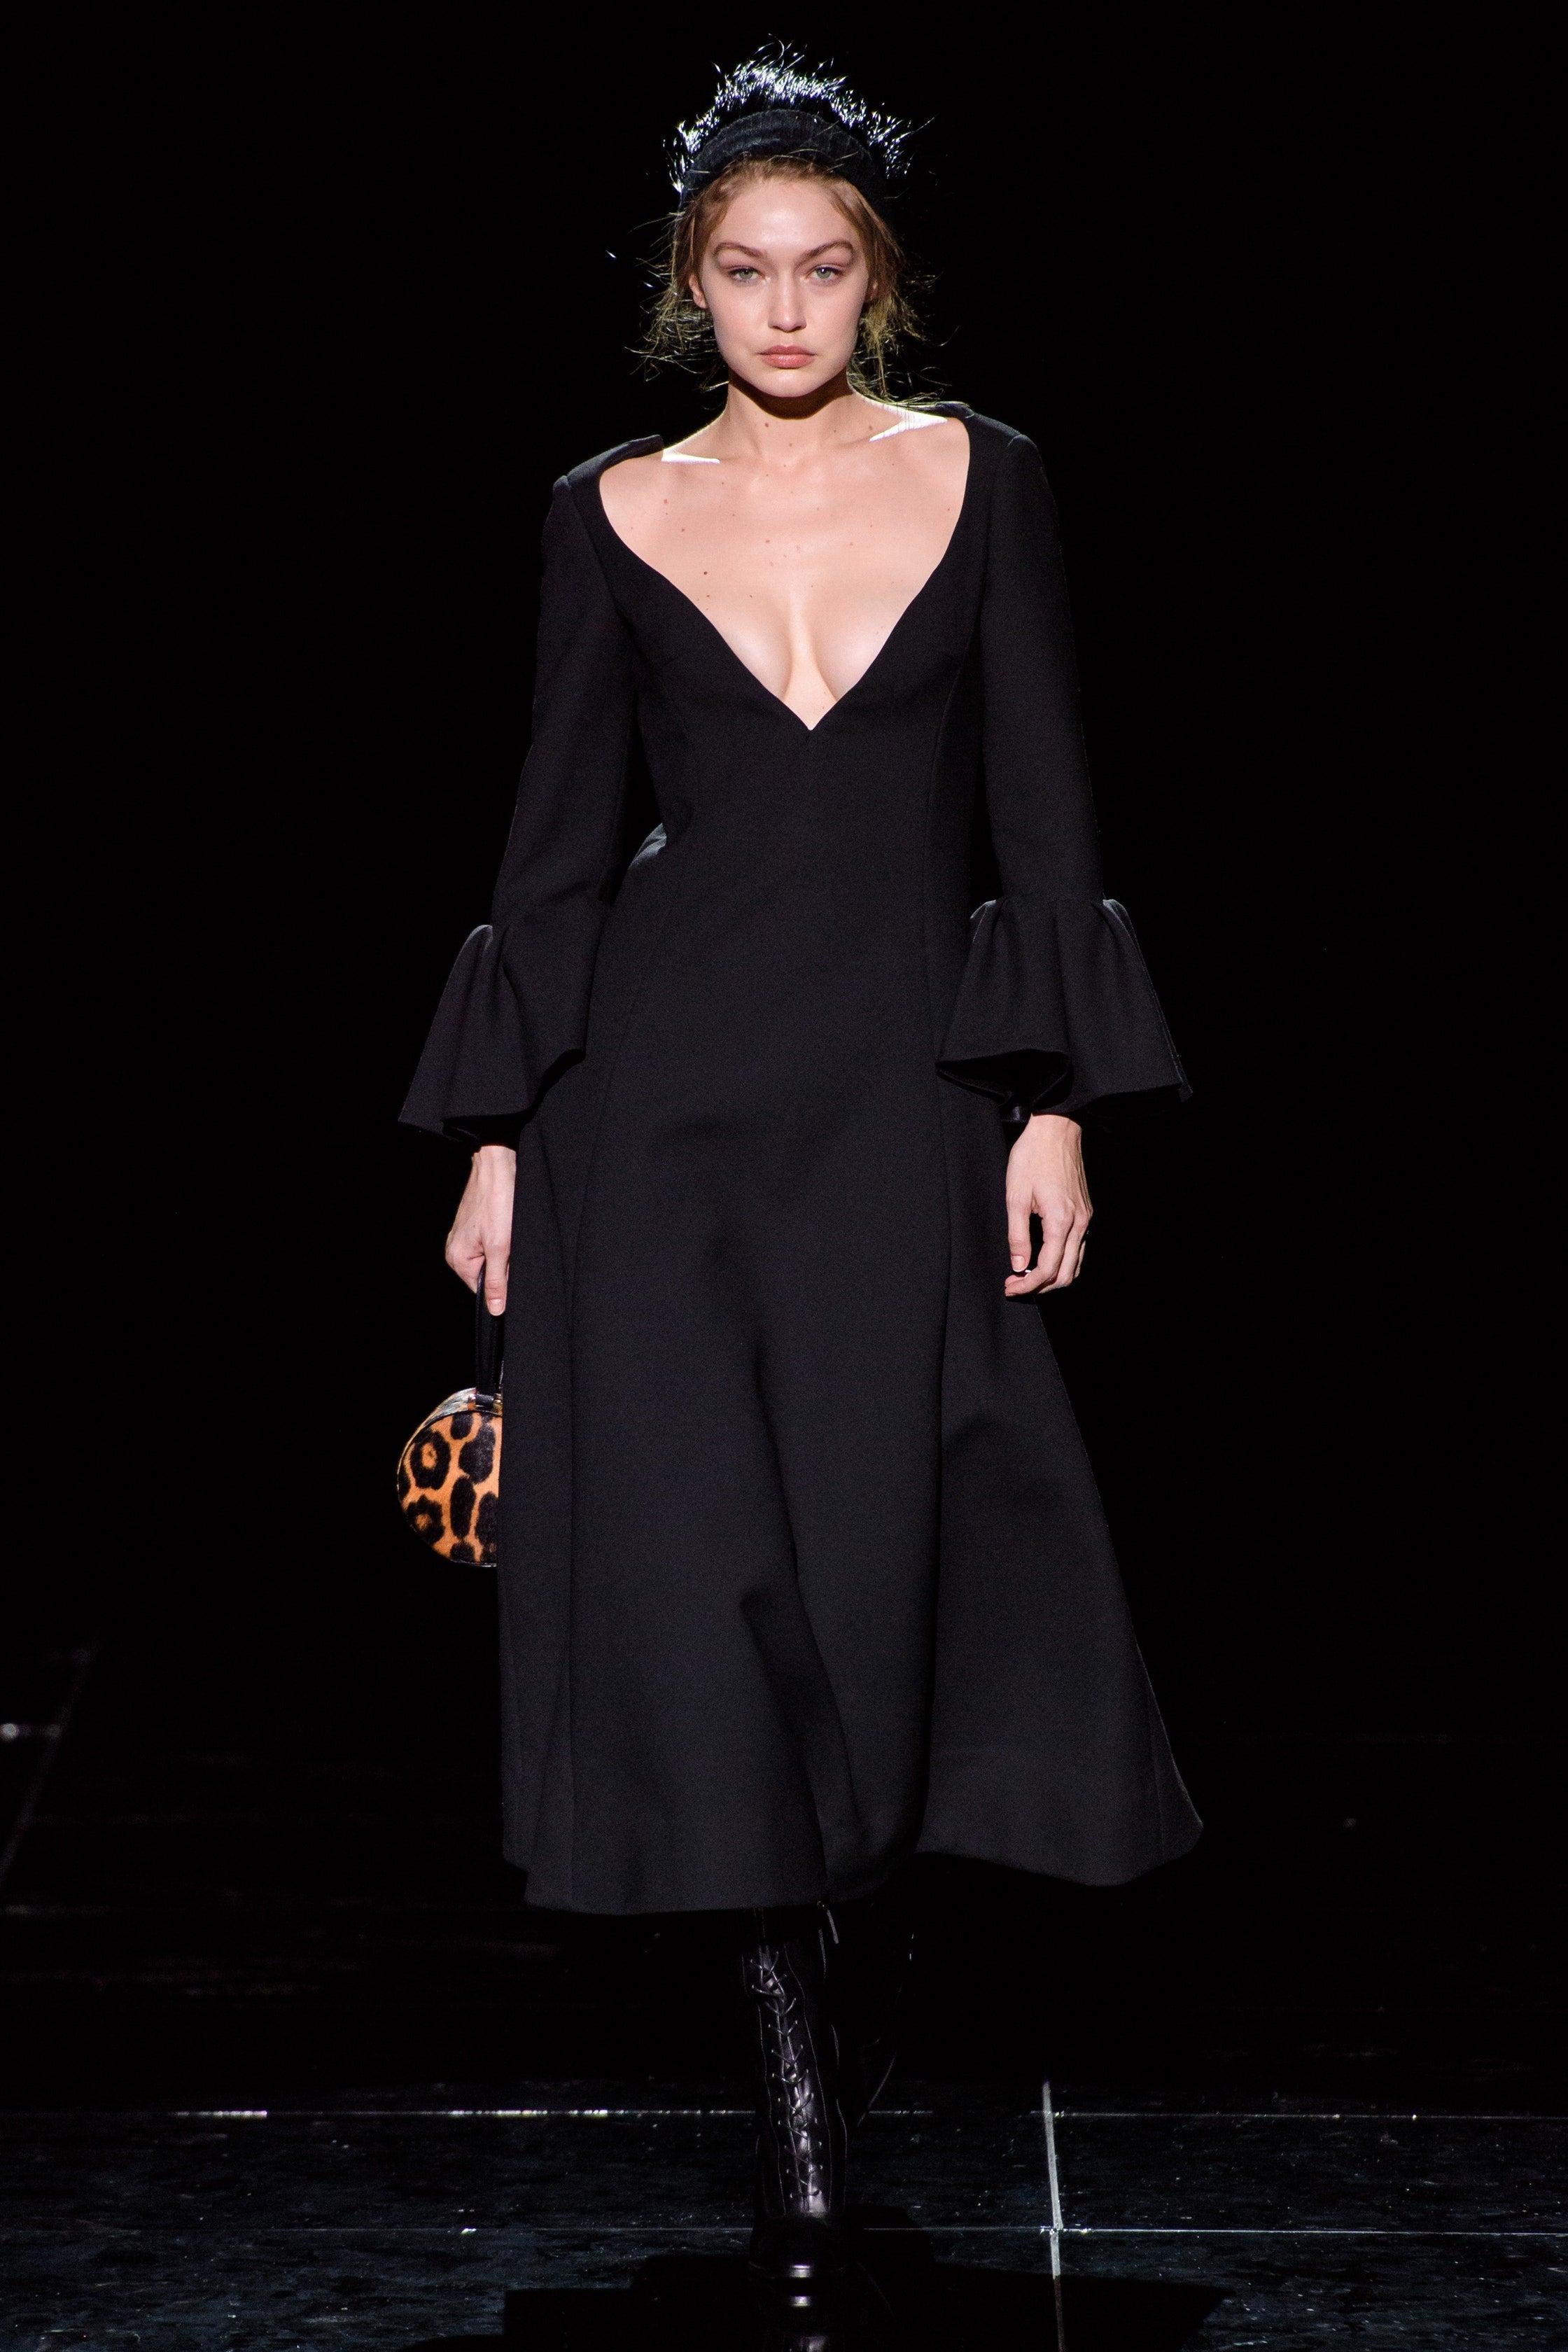 MARC JACOBS Fall-Winter 2019 dress comes in a black wool blend featuring a deep v-neck, a-line style, ruffled sleeves, and a back zipper closure. Seen on Gigi Hadid. Made in USA.
Excellent
Pre-Owned Condition. 

Marked:   2 

Measurements: 
  Bust: